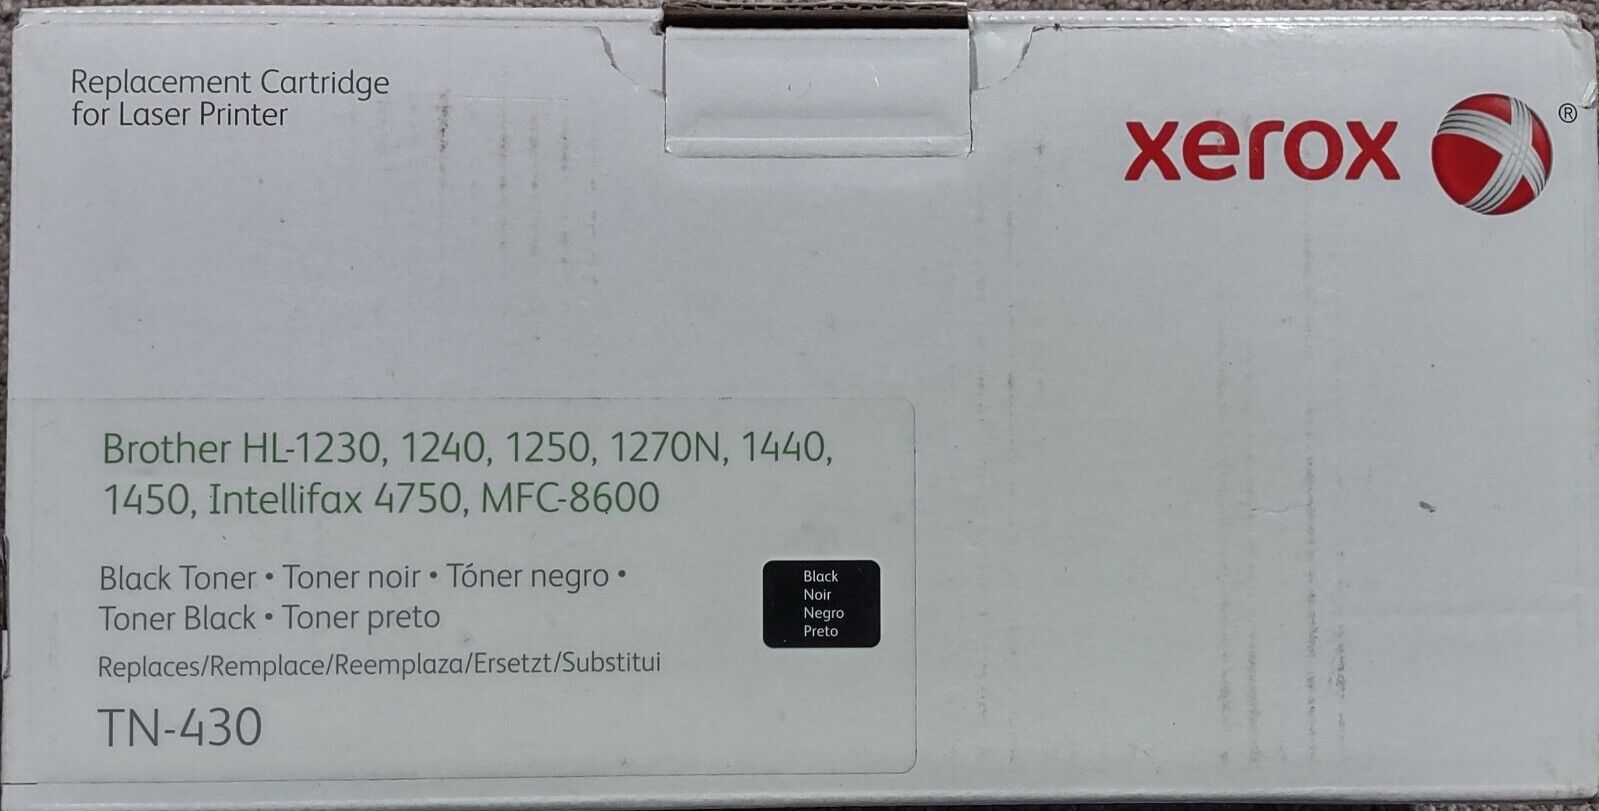 BRAND NEW UNOPENED Xerox TN-430 for Brother HL-1240 HL-1440 HL-1270 DCP-1200